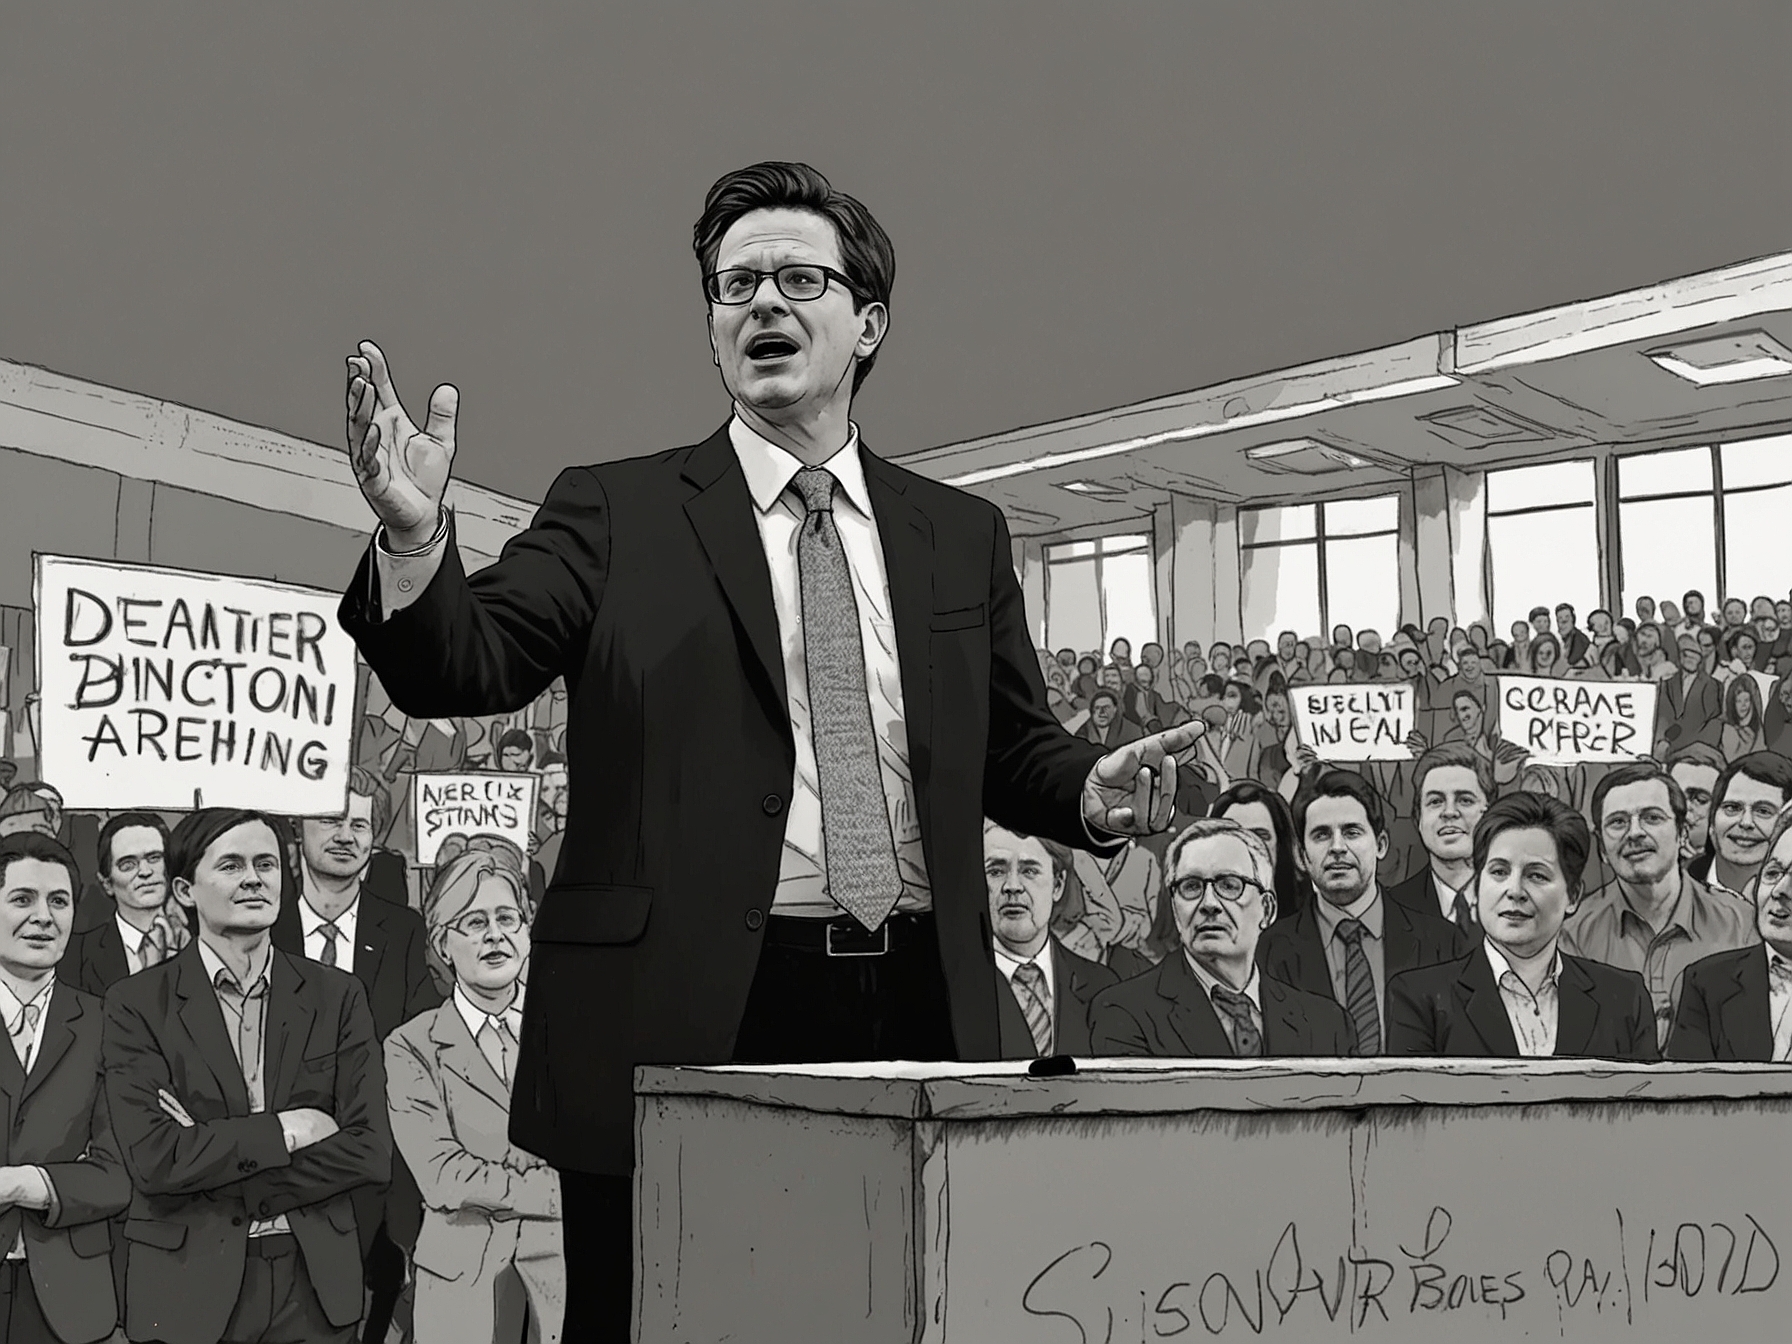 A campaign rally with Steve Baker speaking passionately to Tory supporters, highlighting traditional Conservative values and discussing his potential leadership bid in the upcoming General Election.